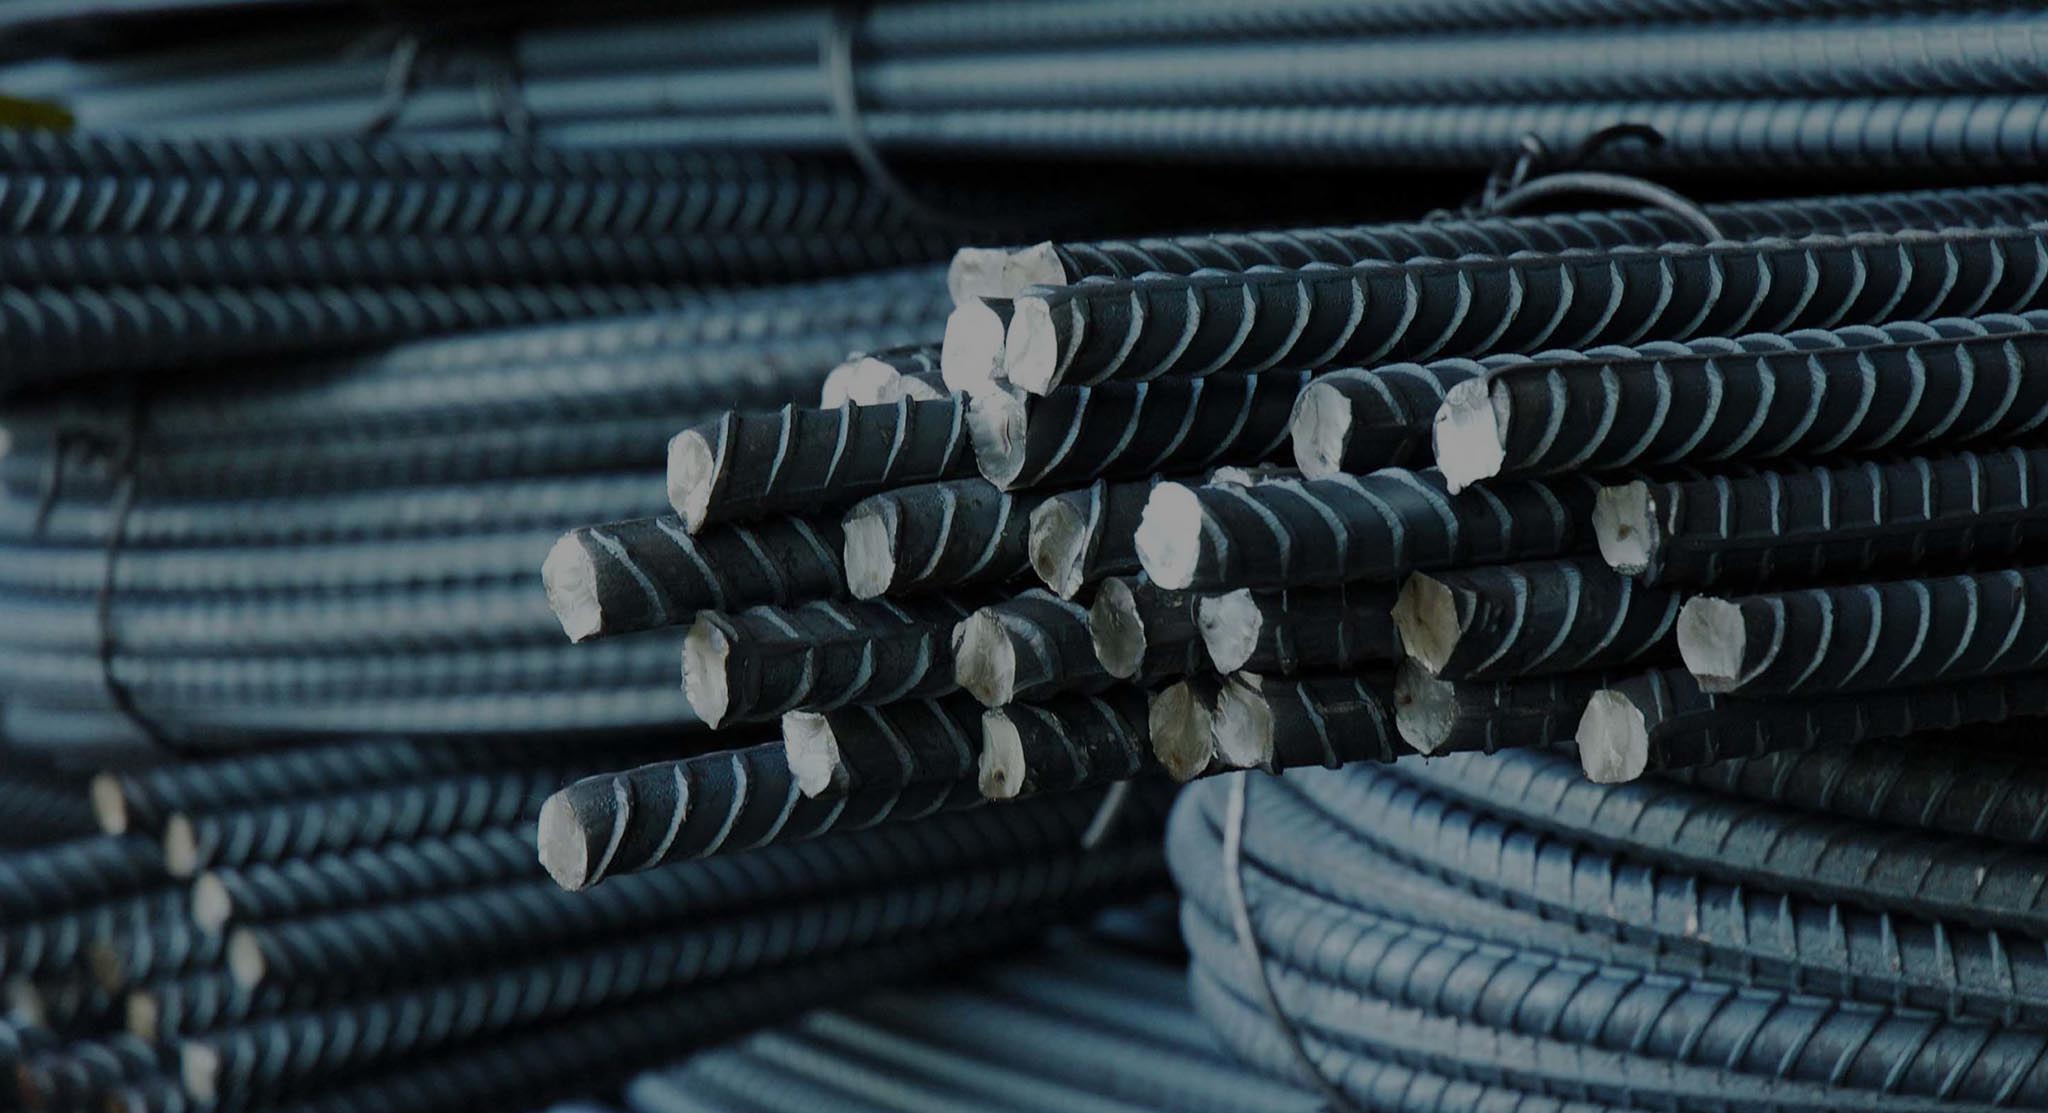 Key factors that affect the price of TMT bars